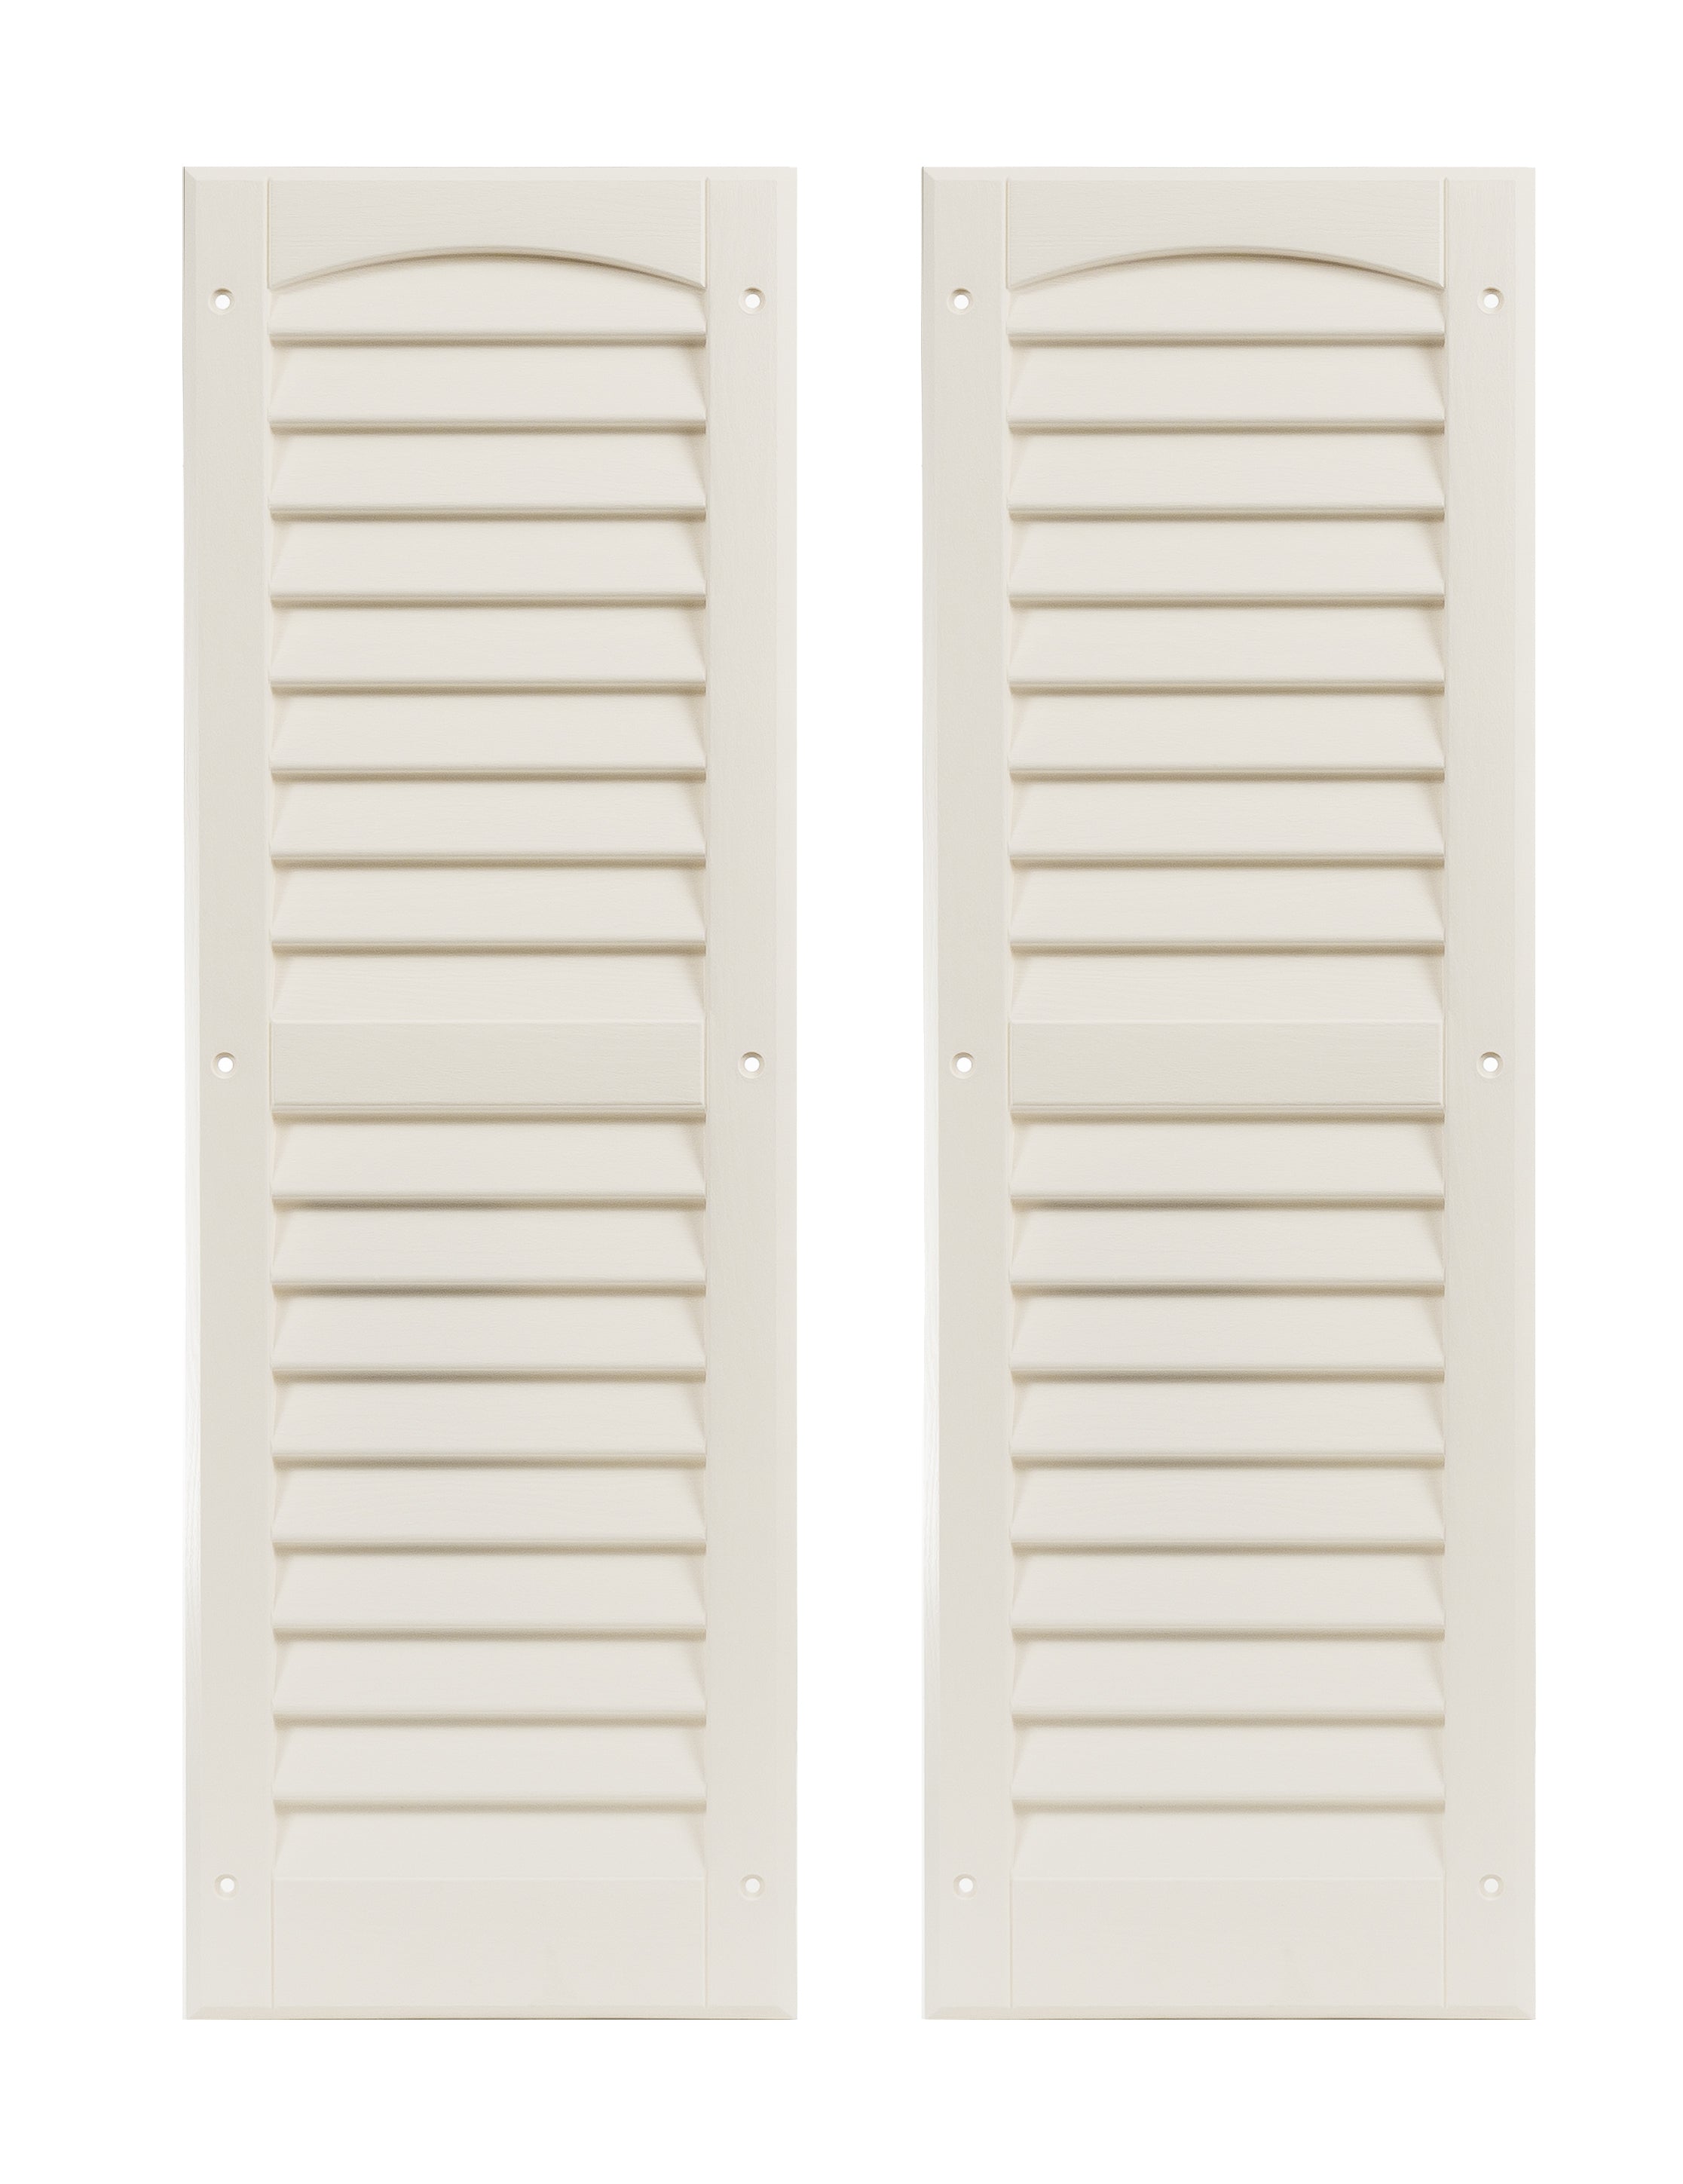 Pair of 9" W x 27" H Louvered White Shutters for Sheds, Playhouses, and MORE 